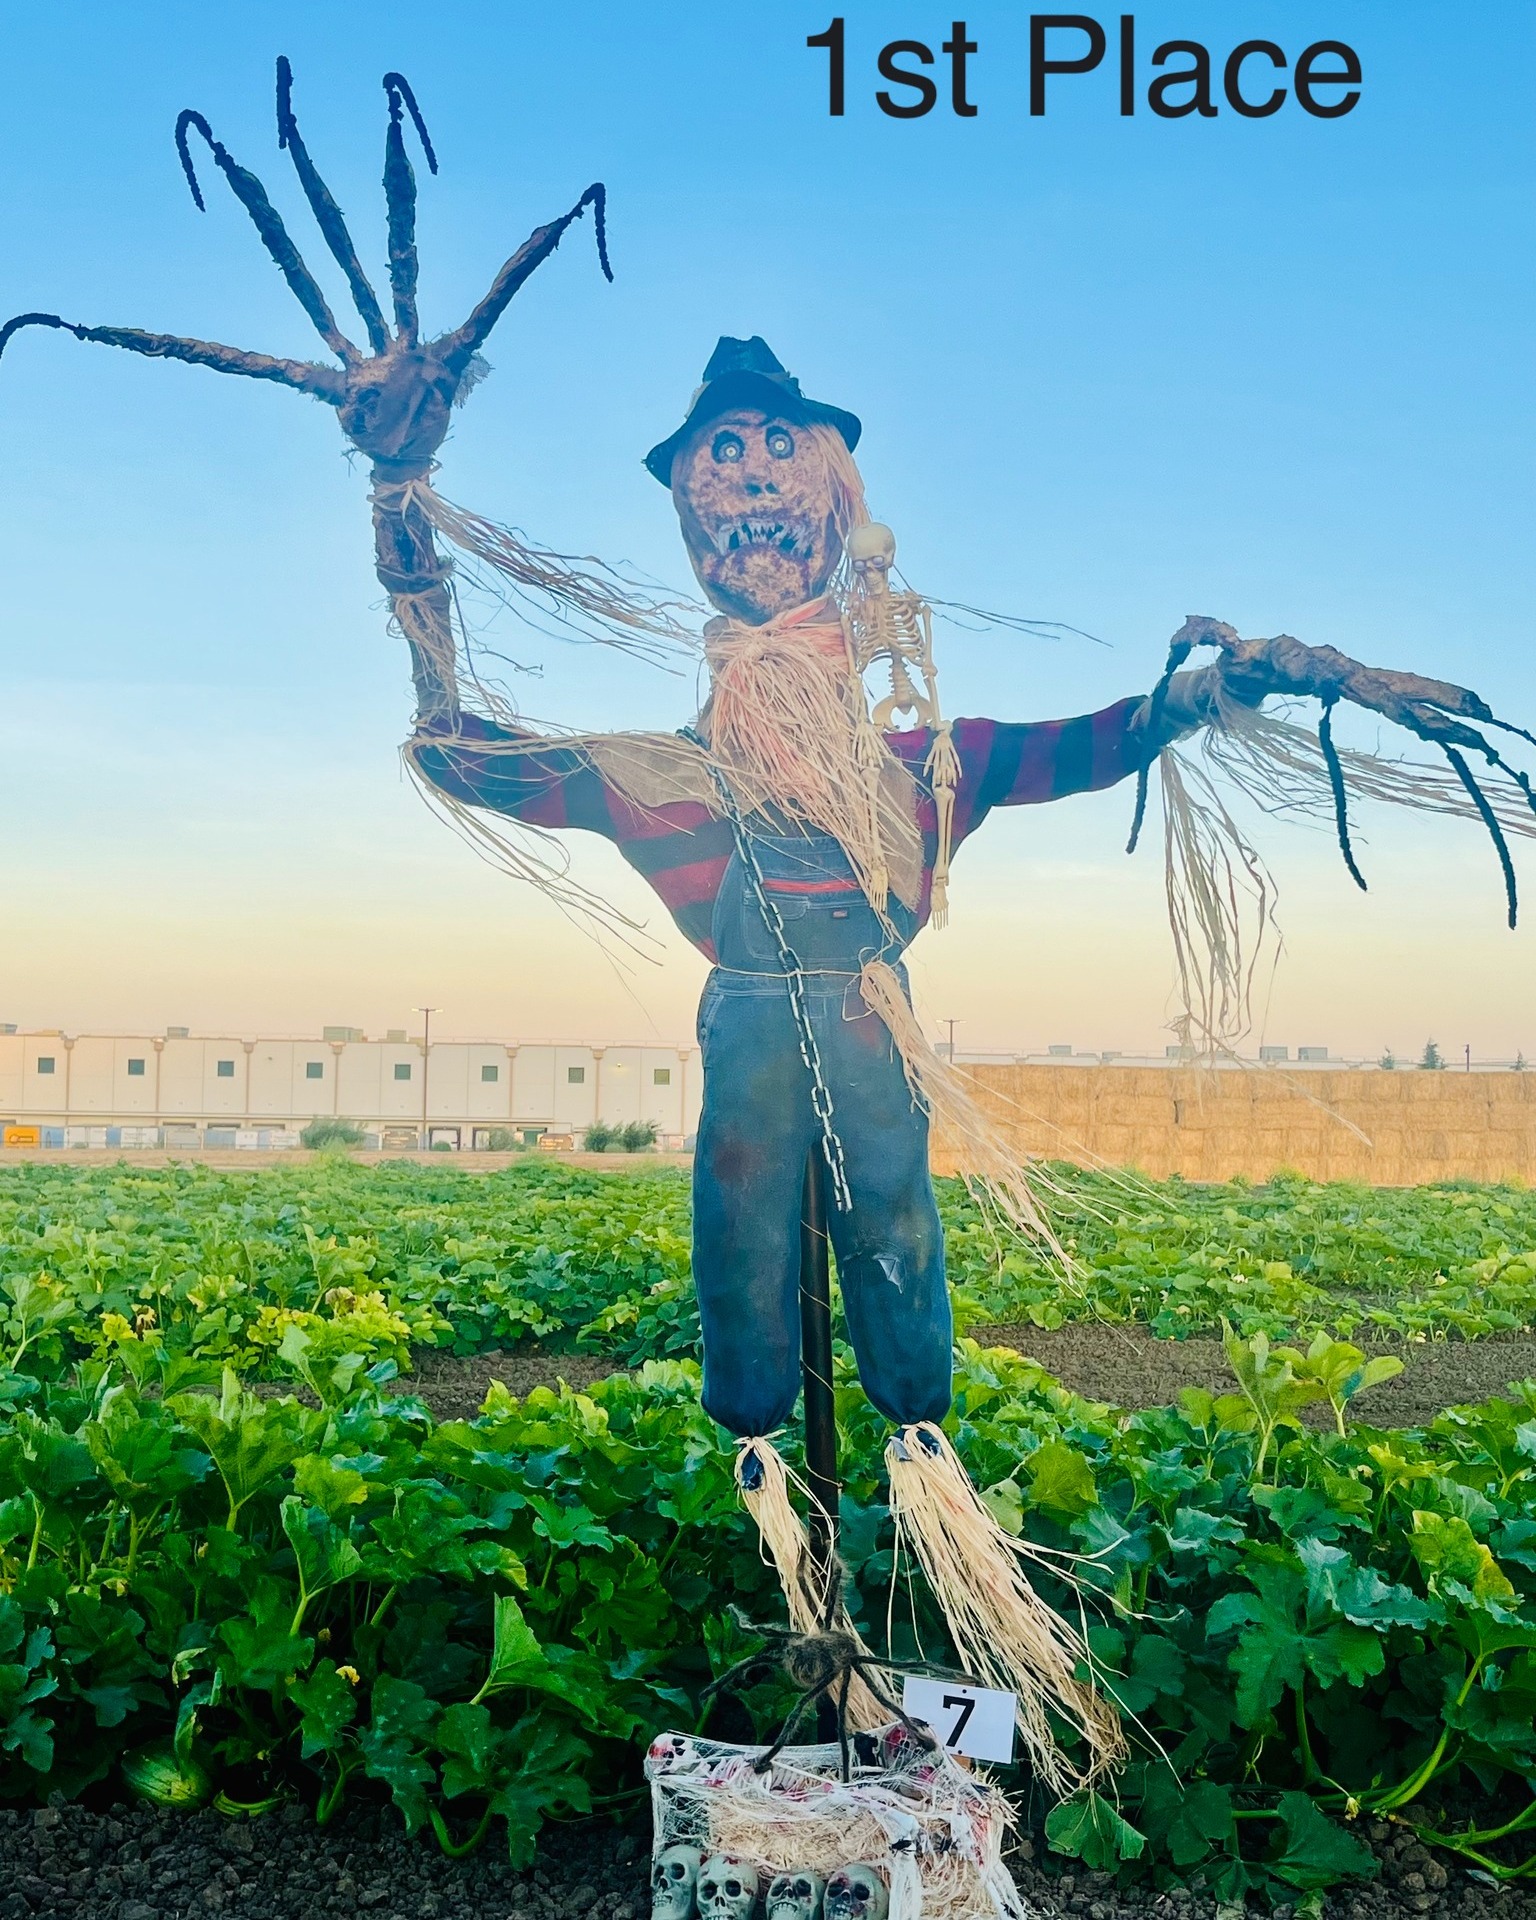 Scary looking scarecrow by a corn field